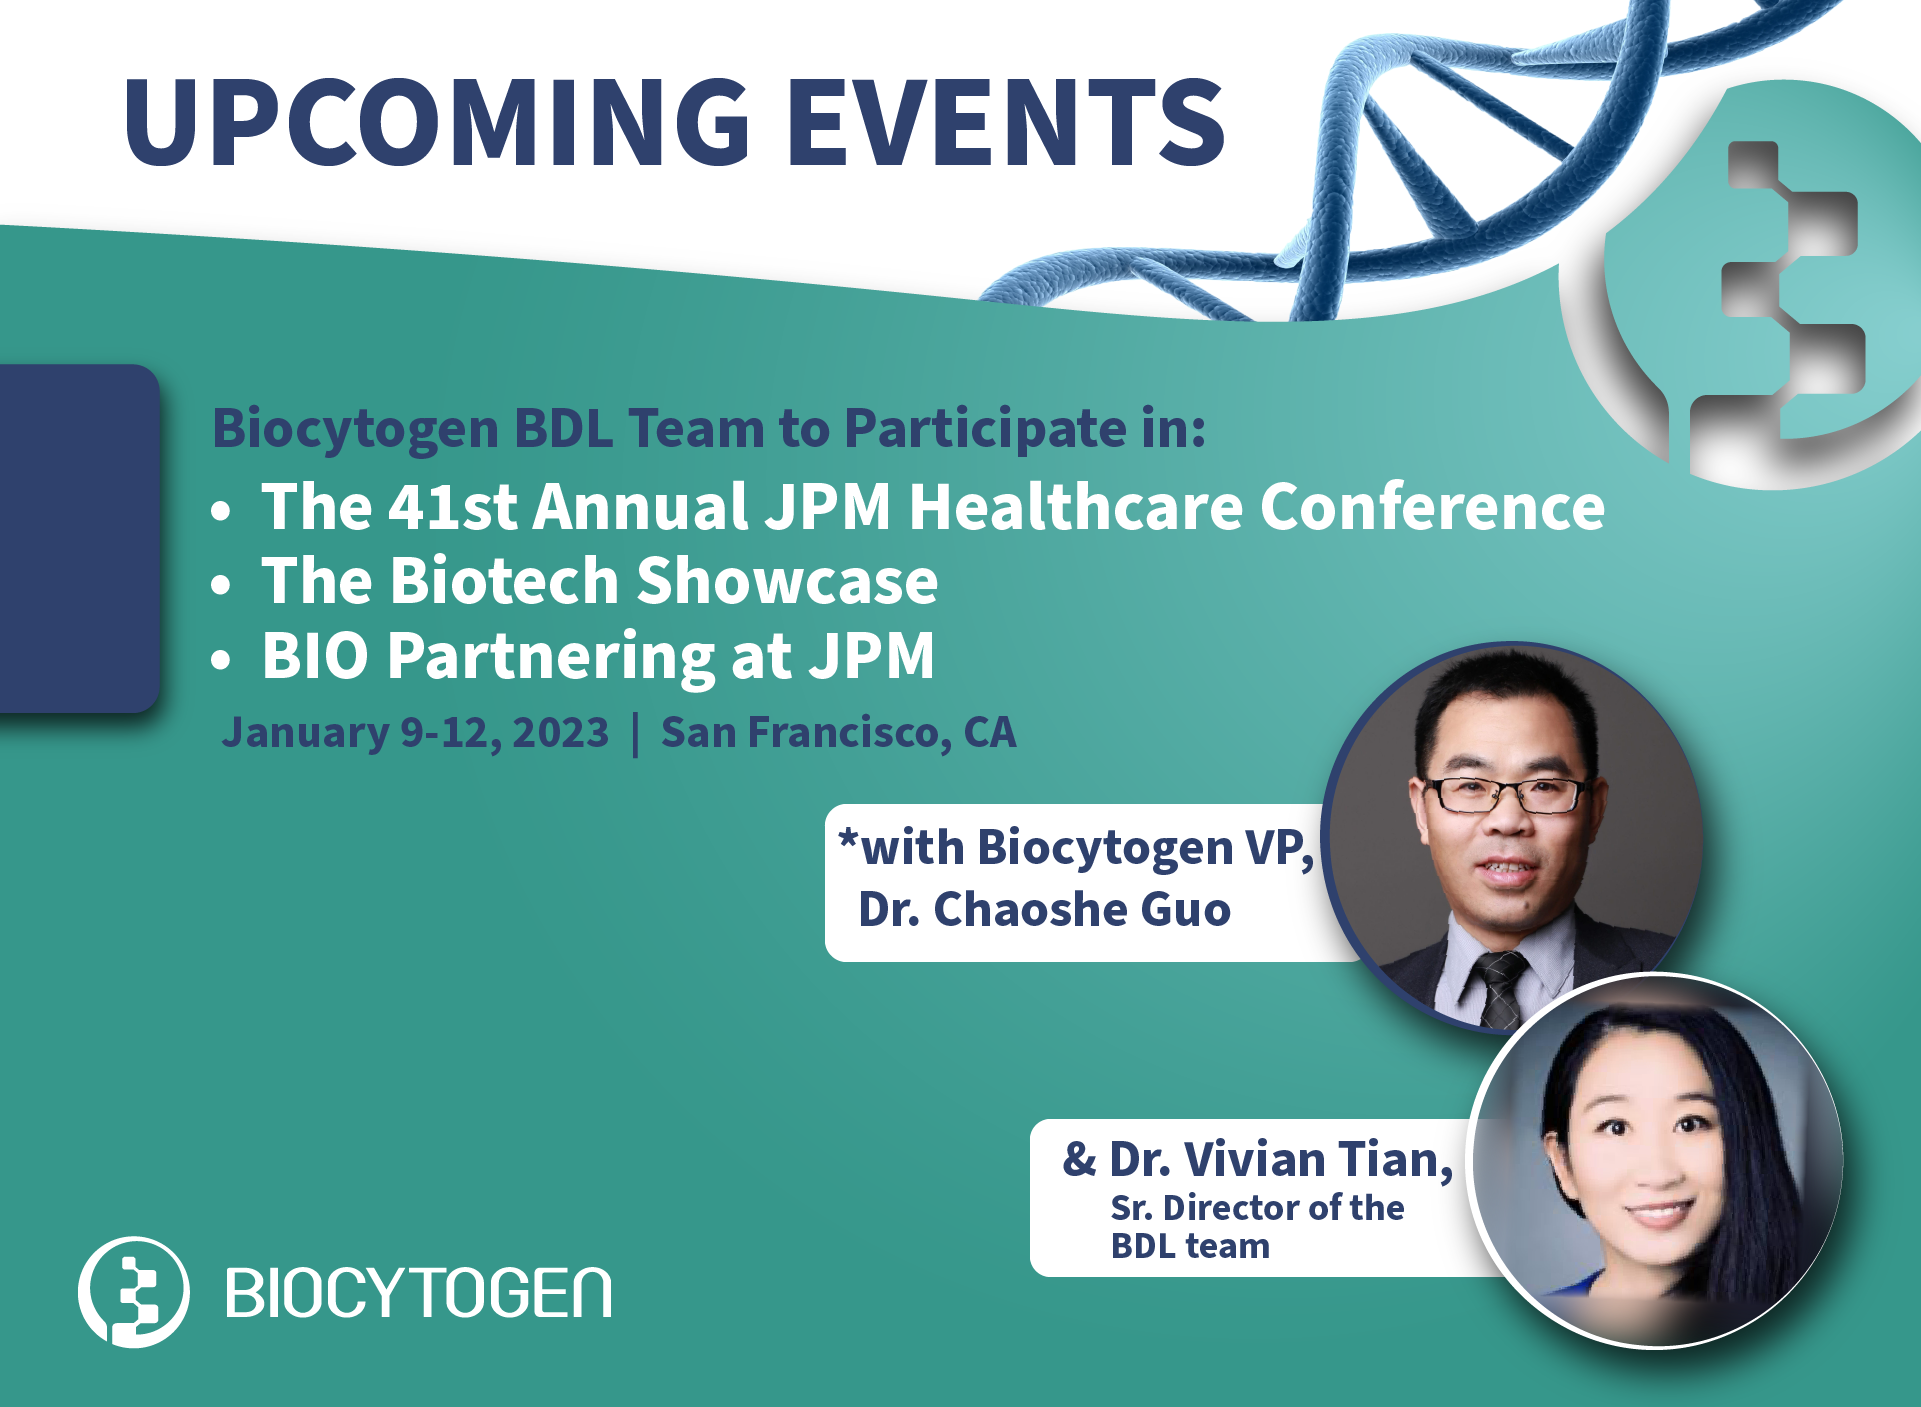 Biocytogen BDL Team to Participate in the 41st Annual JPM Healthcare ...